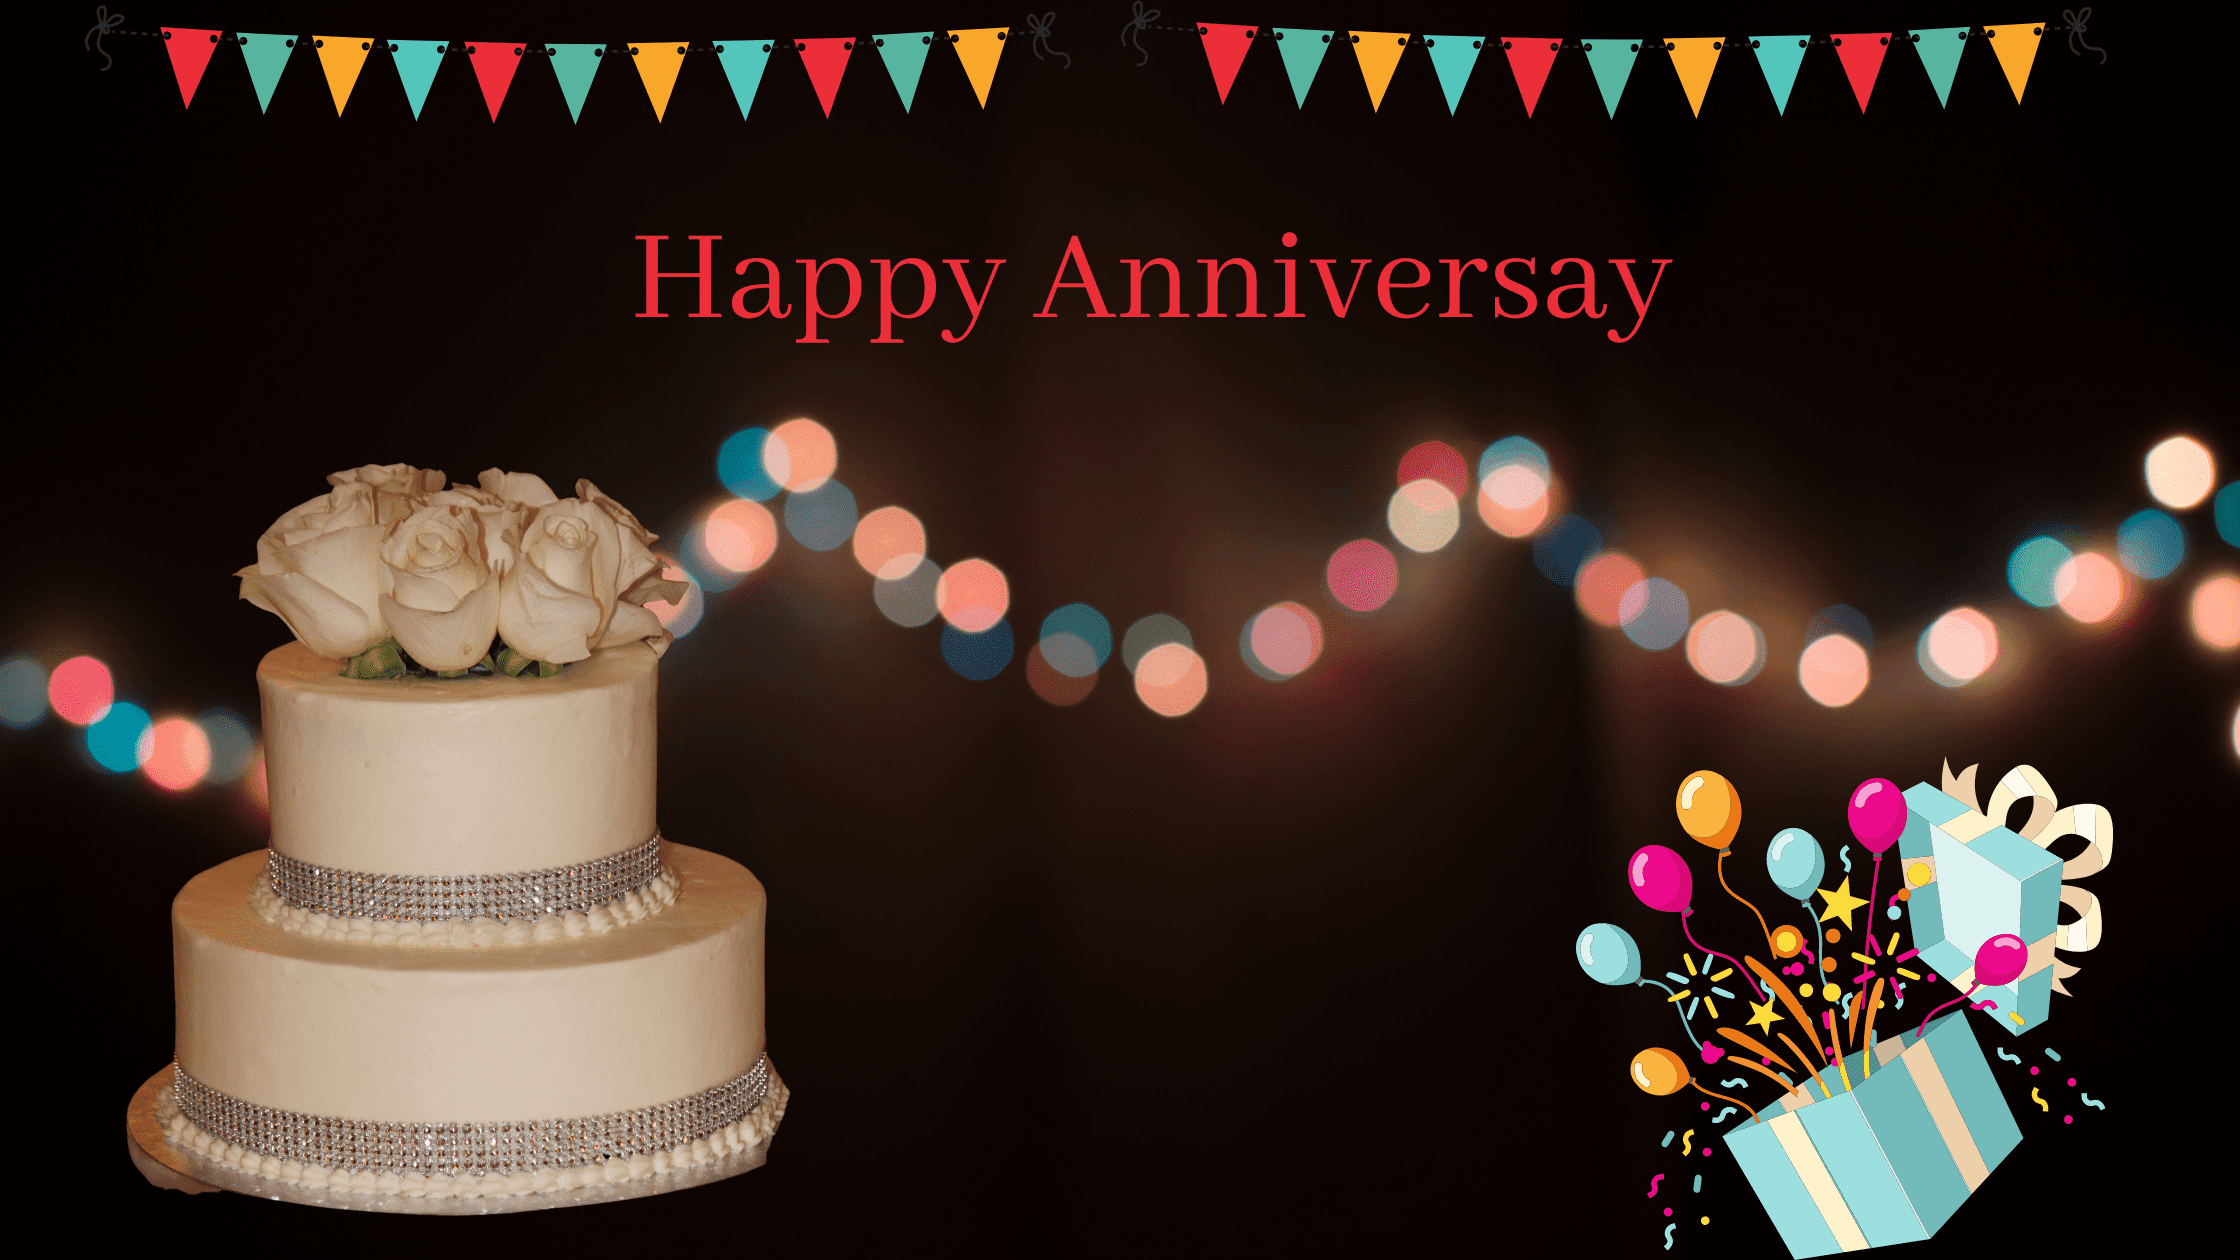 Celebrate Your Anniversary with Delicious Cakes